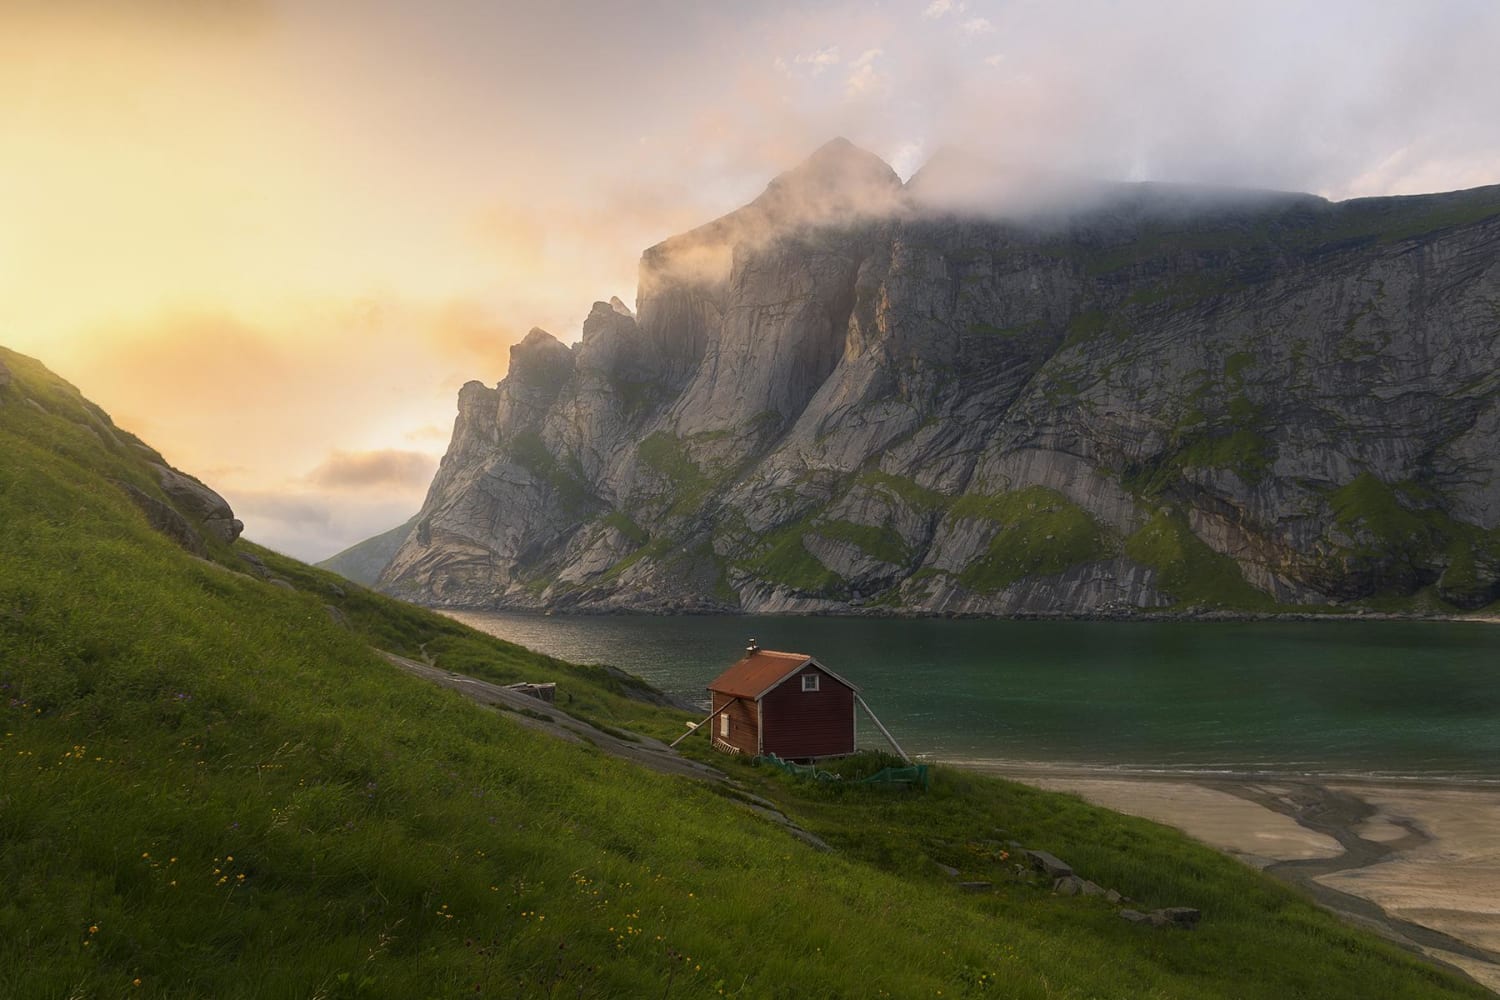 Norway's breathtaking countryside